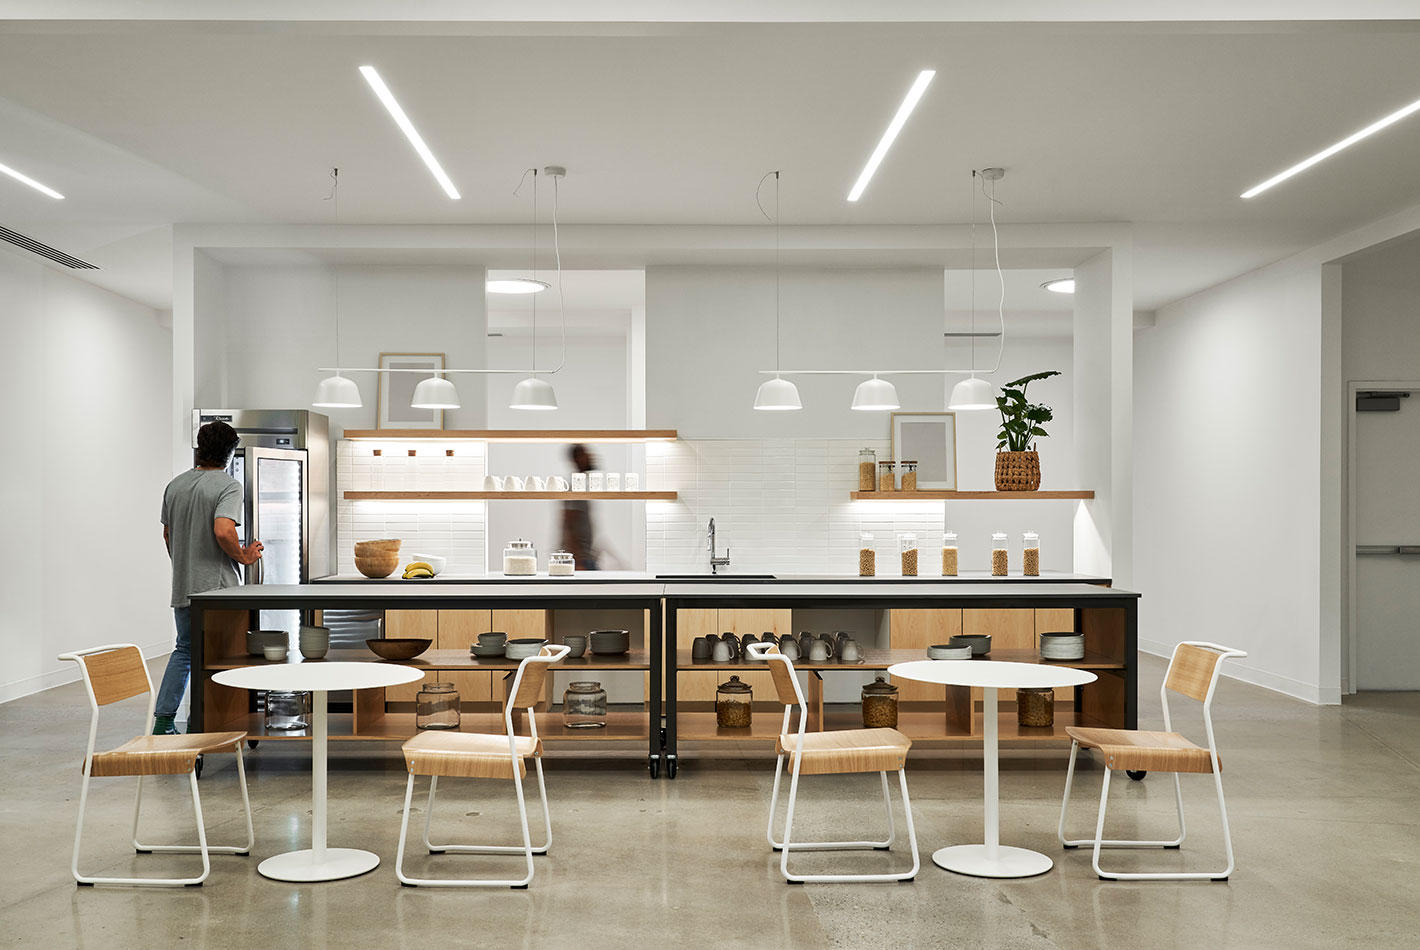 The employee cafe area at Postmates Headquarters features tables and chairs in front of a working service area, complete with refrigerator and sink.